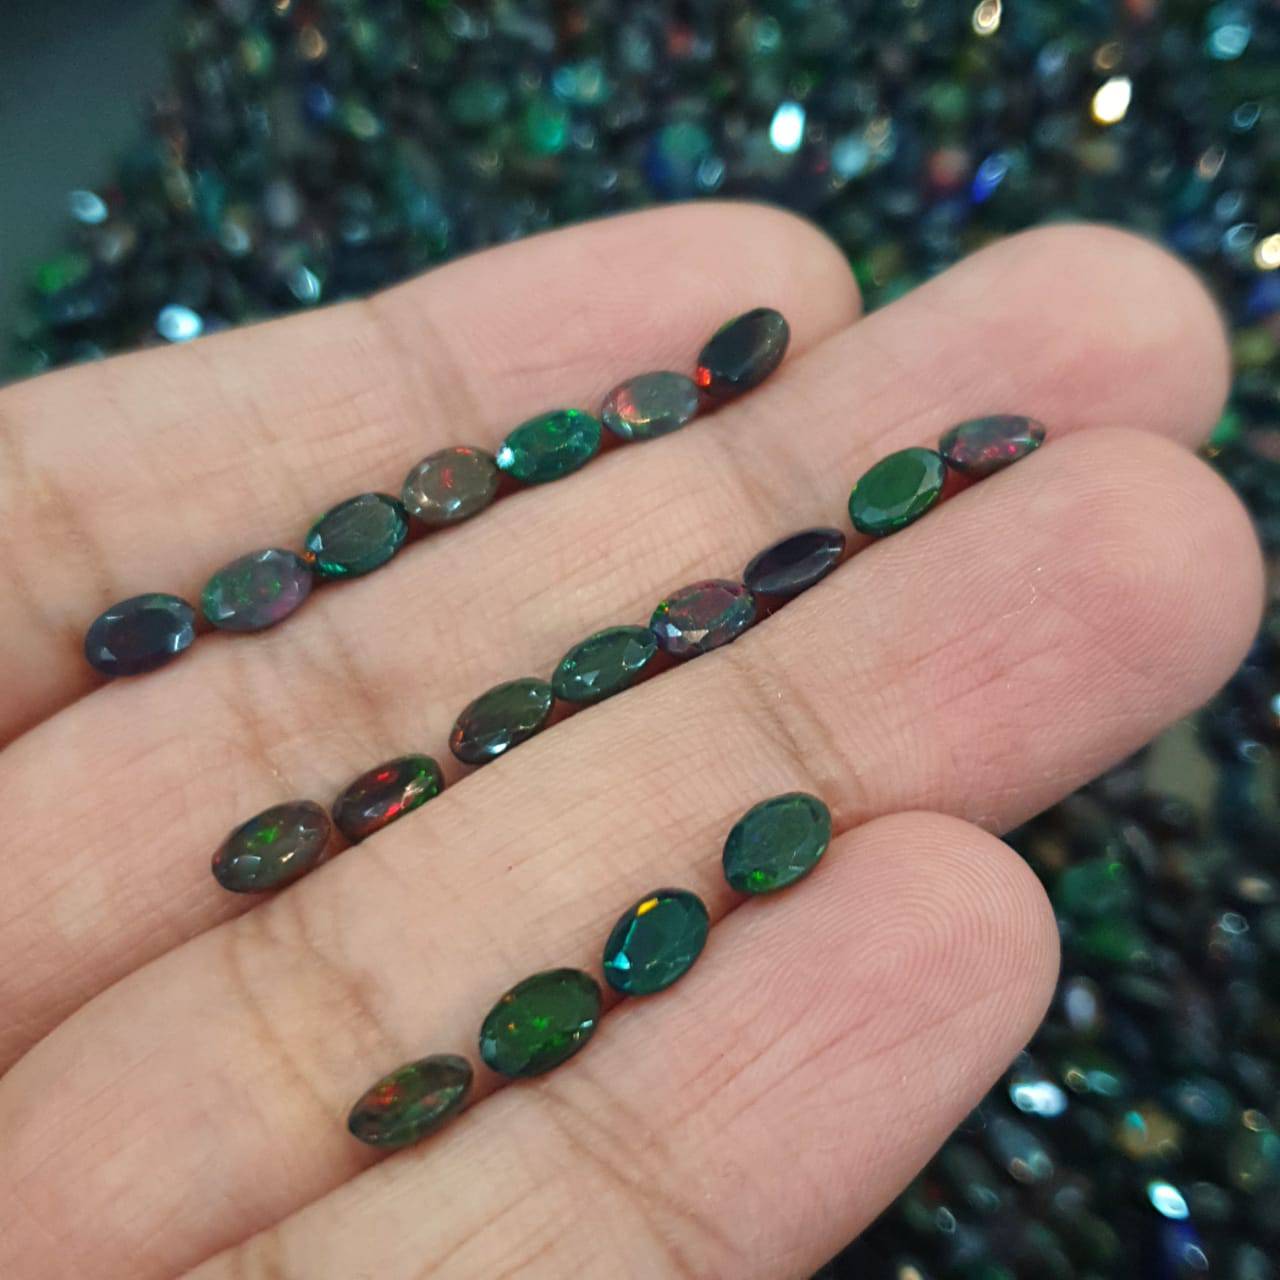 14 Pcs Natural Black Opal Ovals | Faceted in 6x4mm or 7x5mm Ovals - The LabradoriteKing